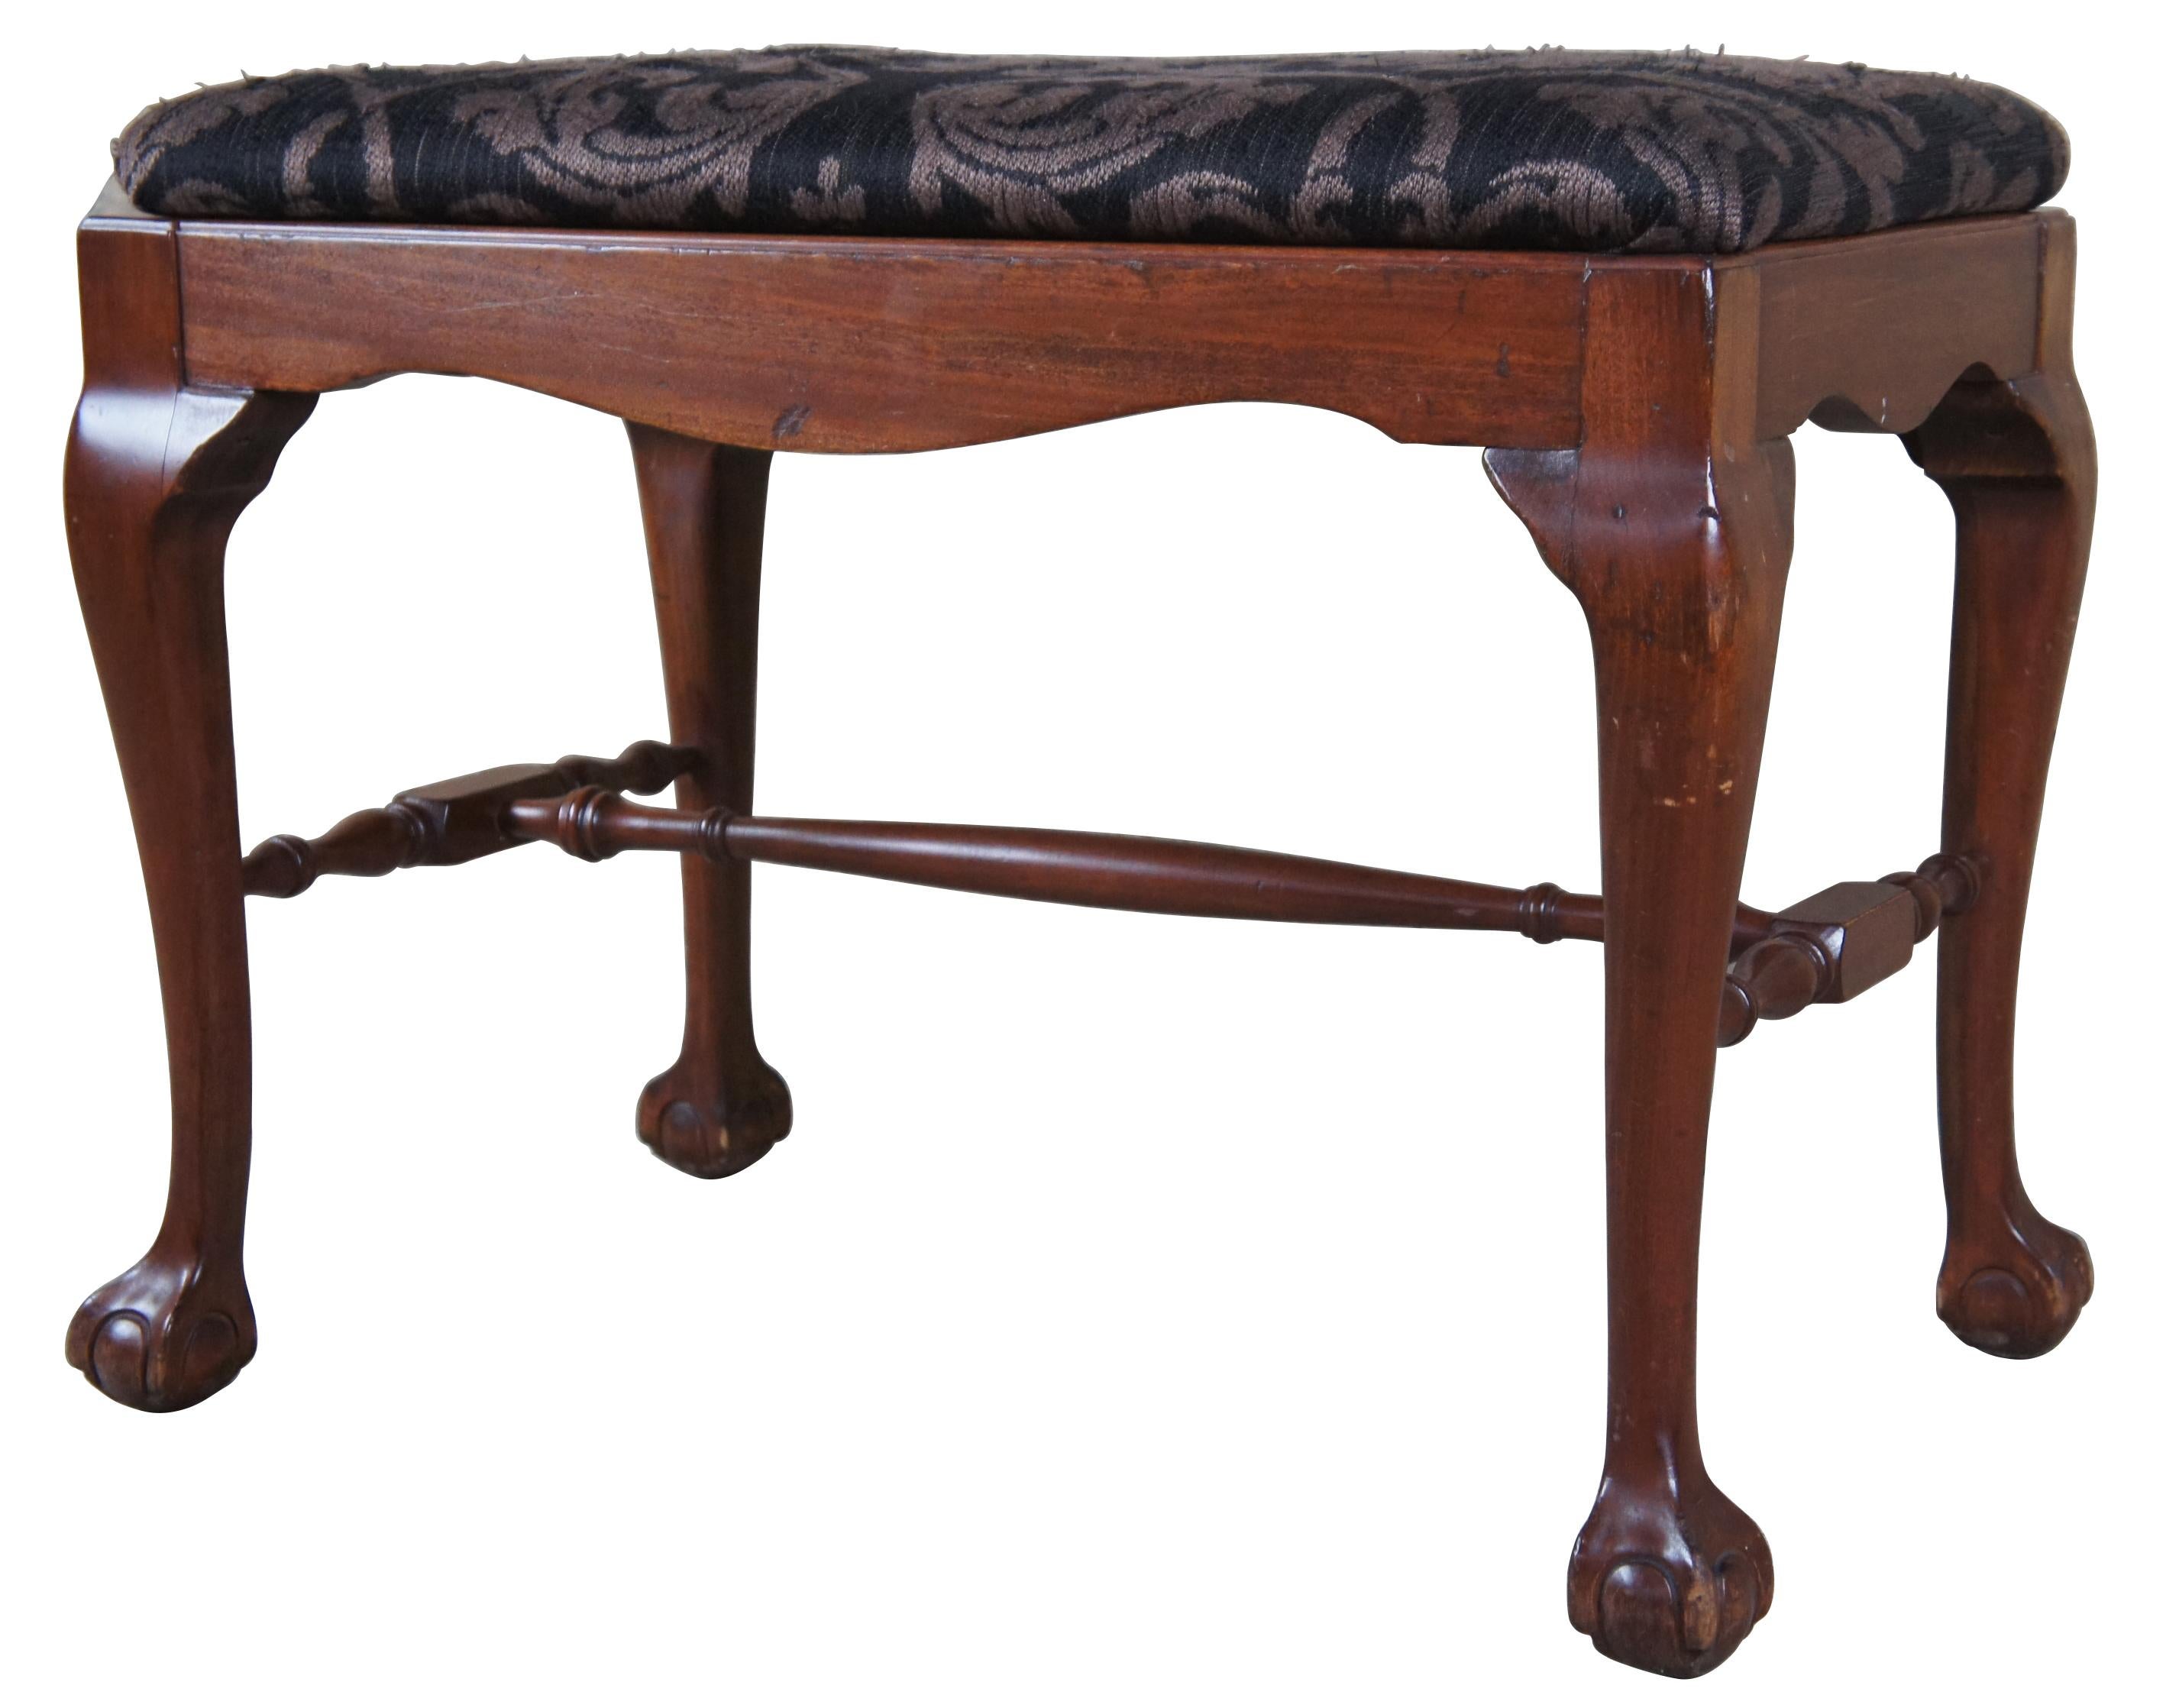 Vintage damask upholstered mahogany stool or bench. Features Chippendale styling with four legs connected by an H stretcher and ball and claw feet. Measure: 24